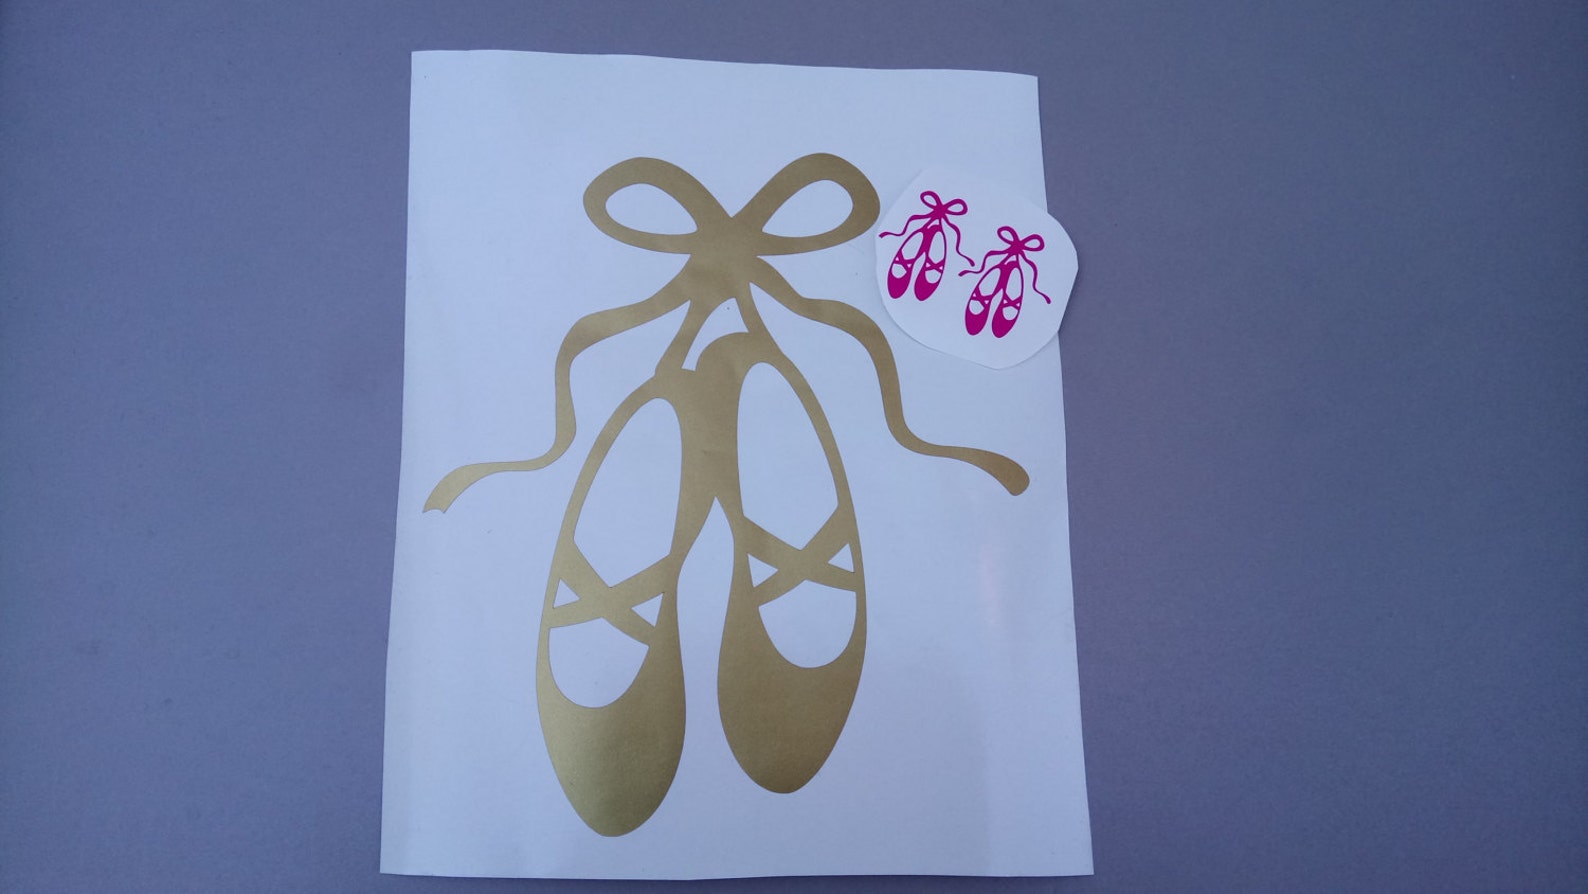 set of 10 ballet shoes decal/ ballet slippers vinyl wall decal